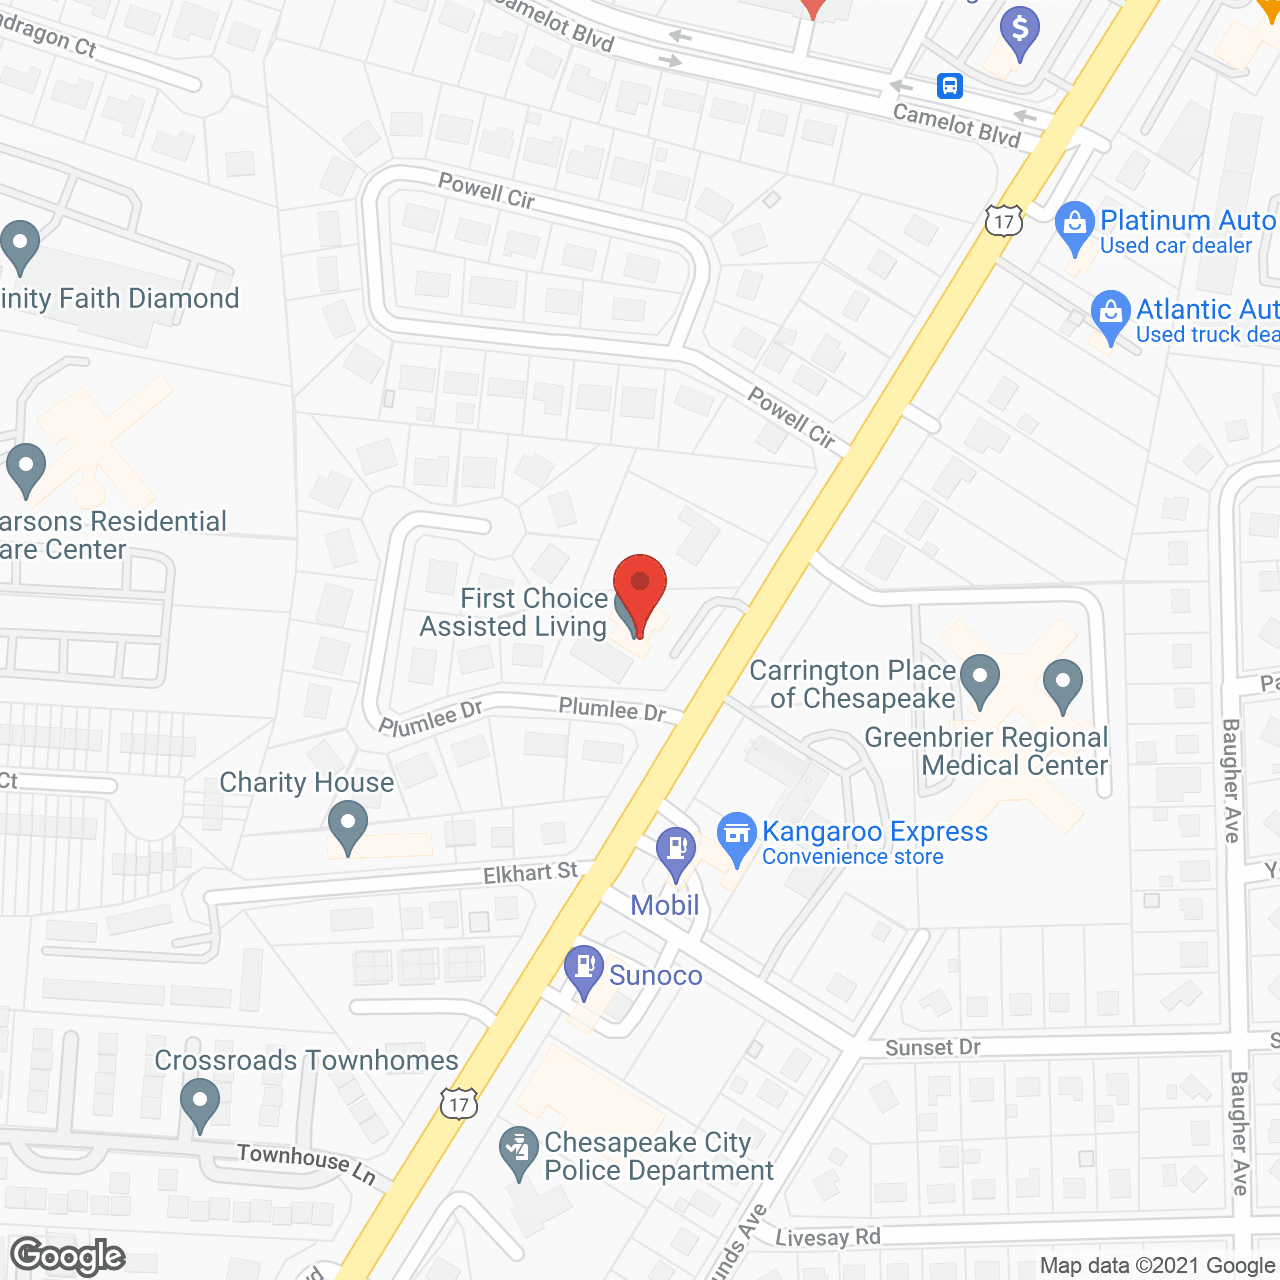 First Choice Assisted Living LLC in google map